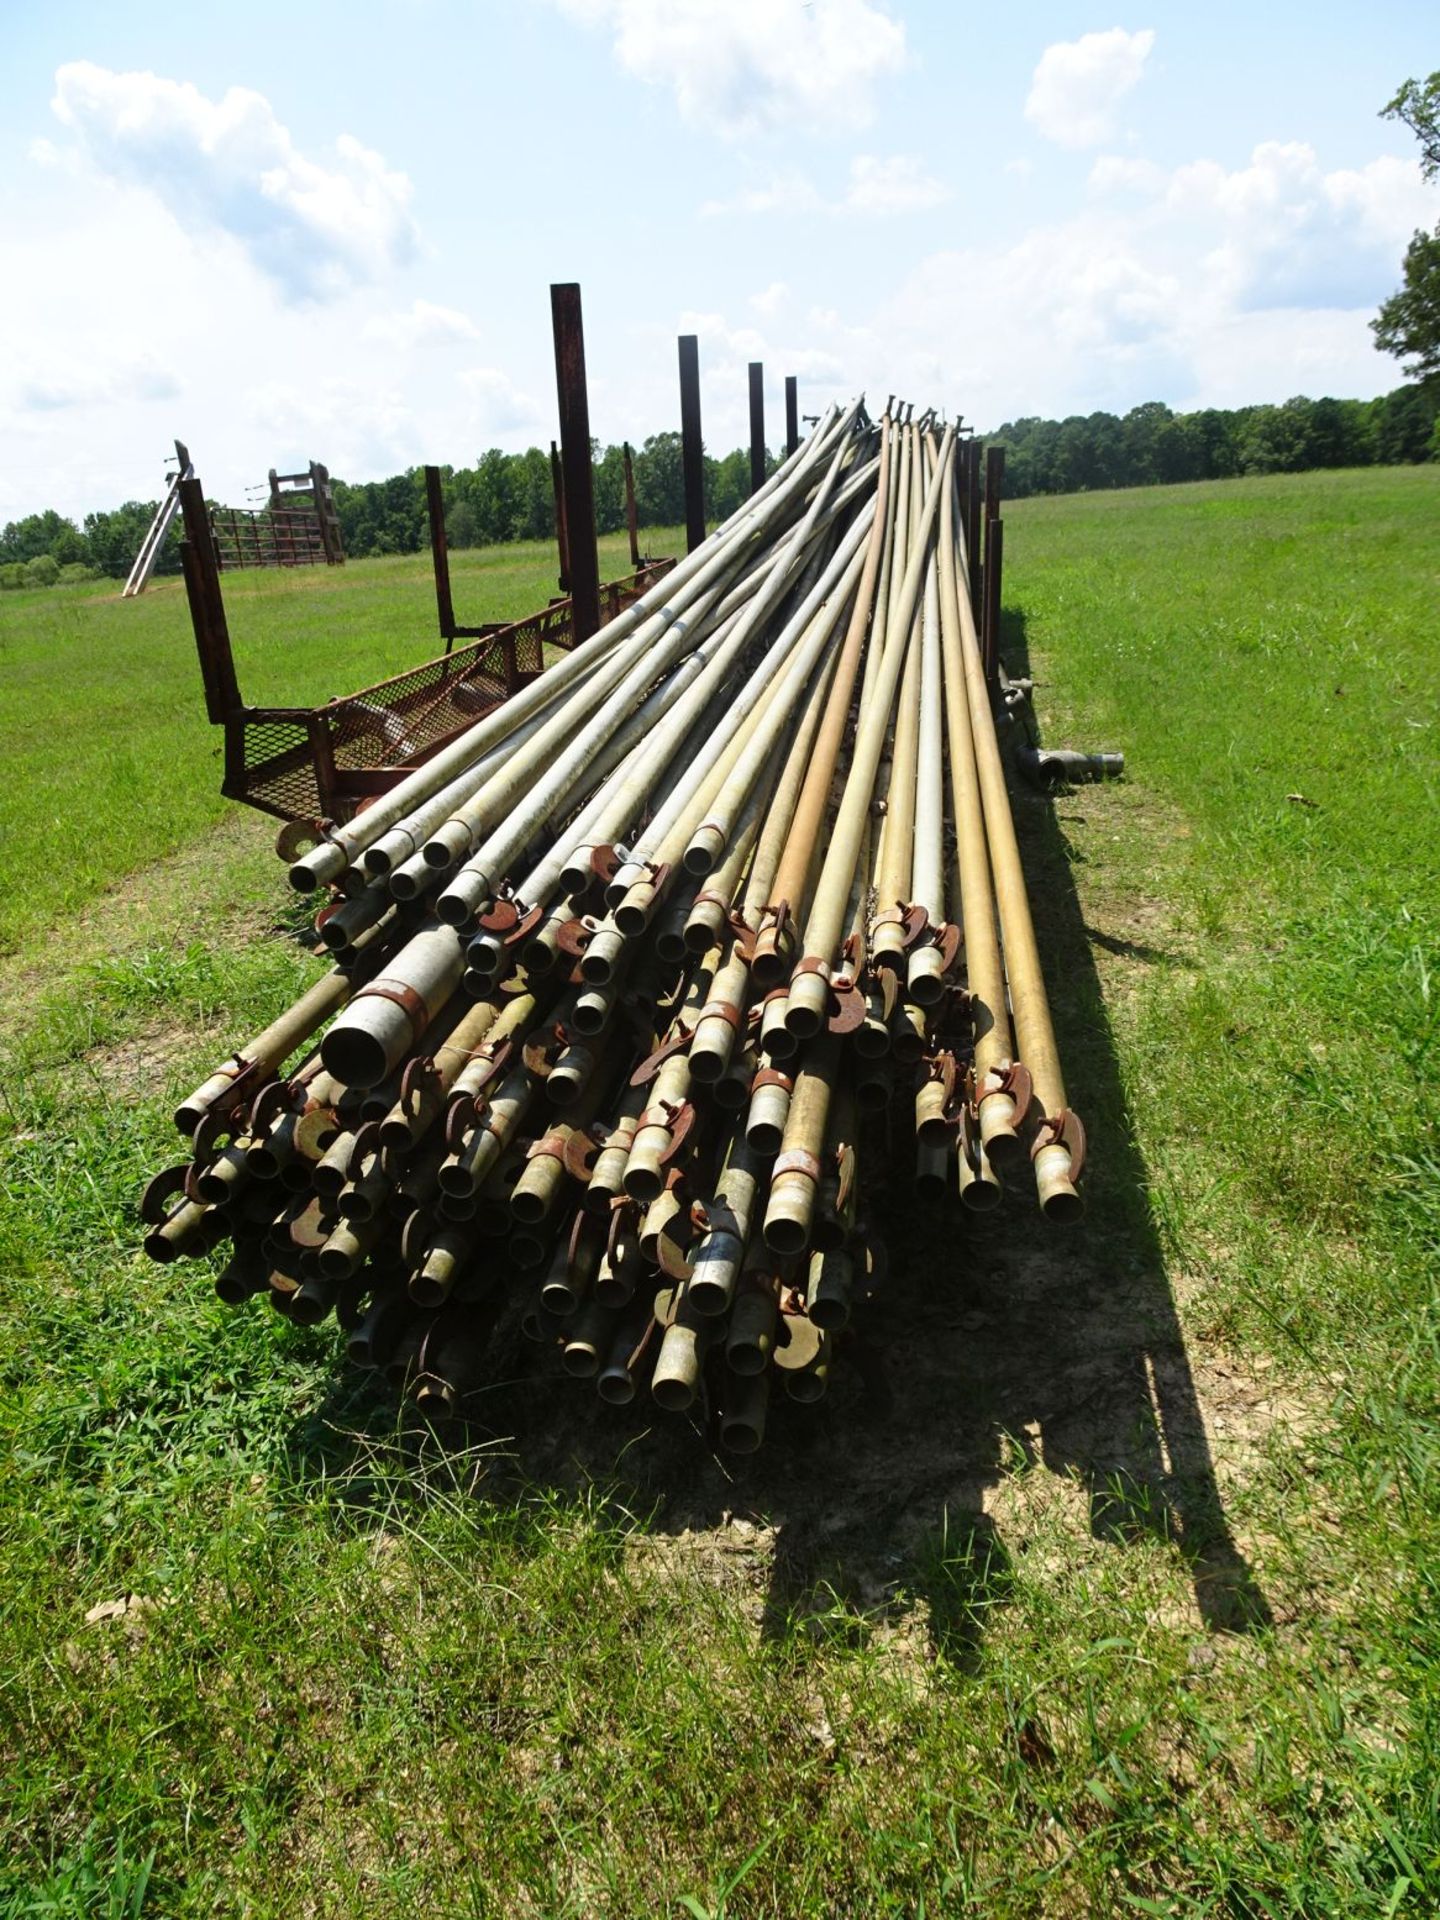 Large Qty of Rainway Quick Connect 2" Diameter Irrigation Pipes Varying Lengths, (1) Trailer Frame